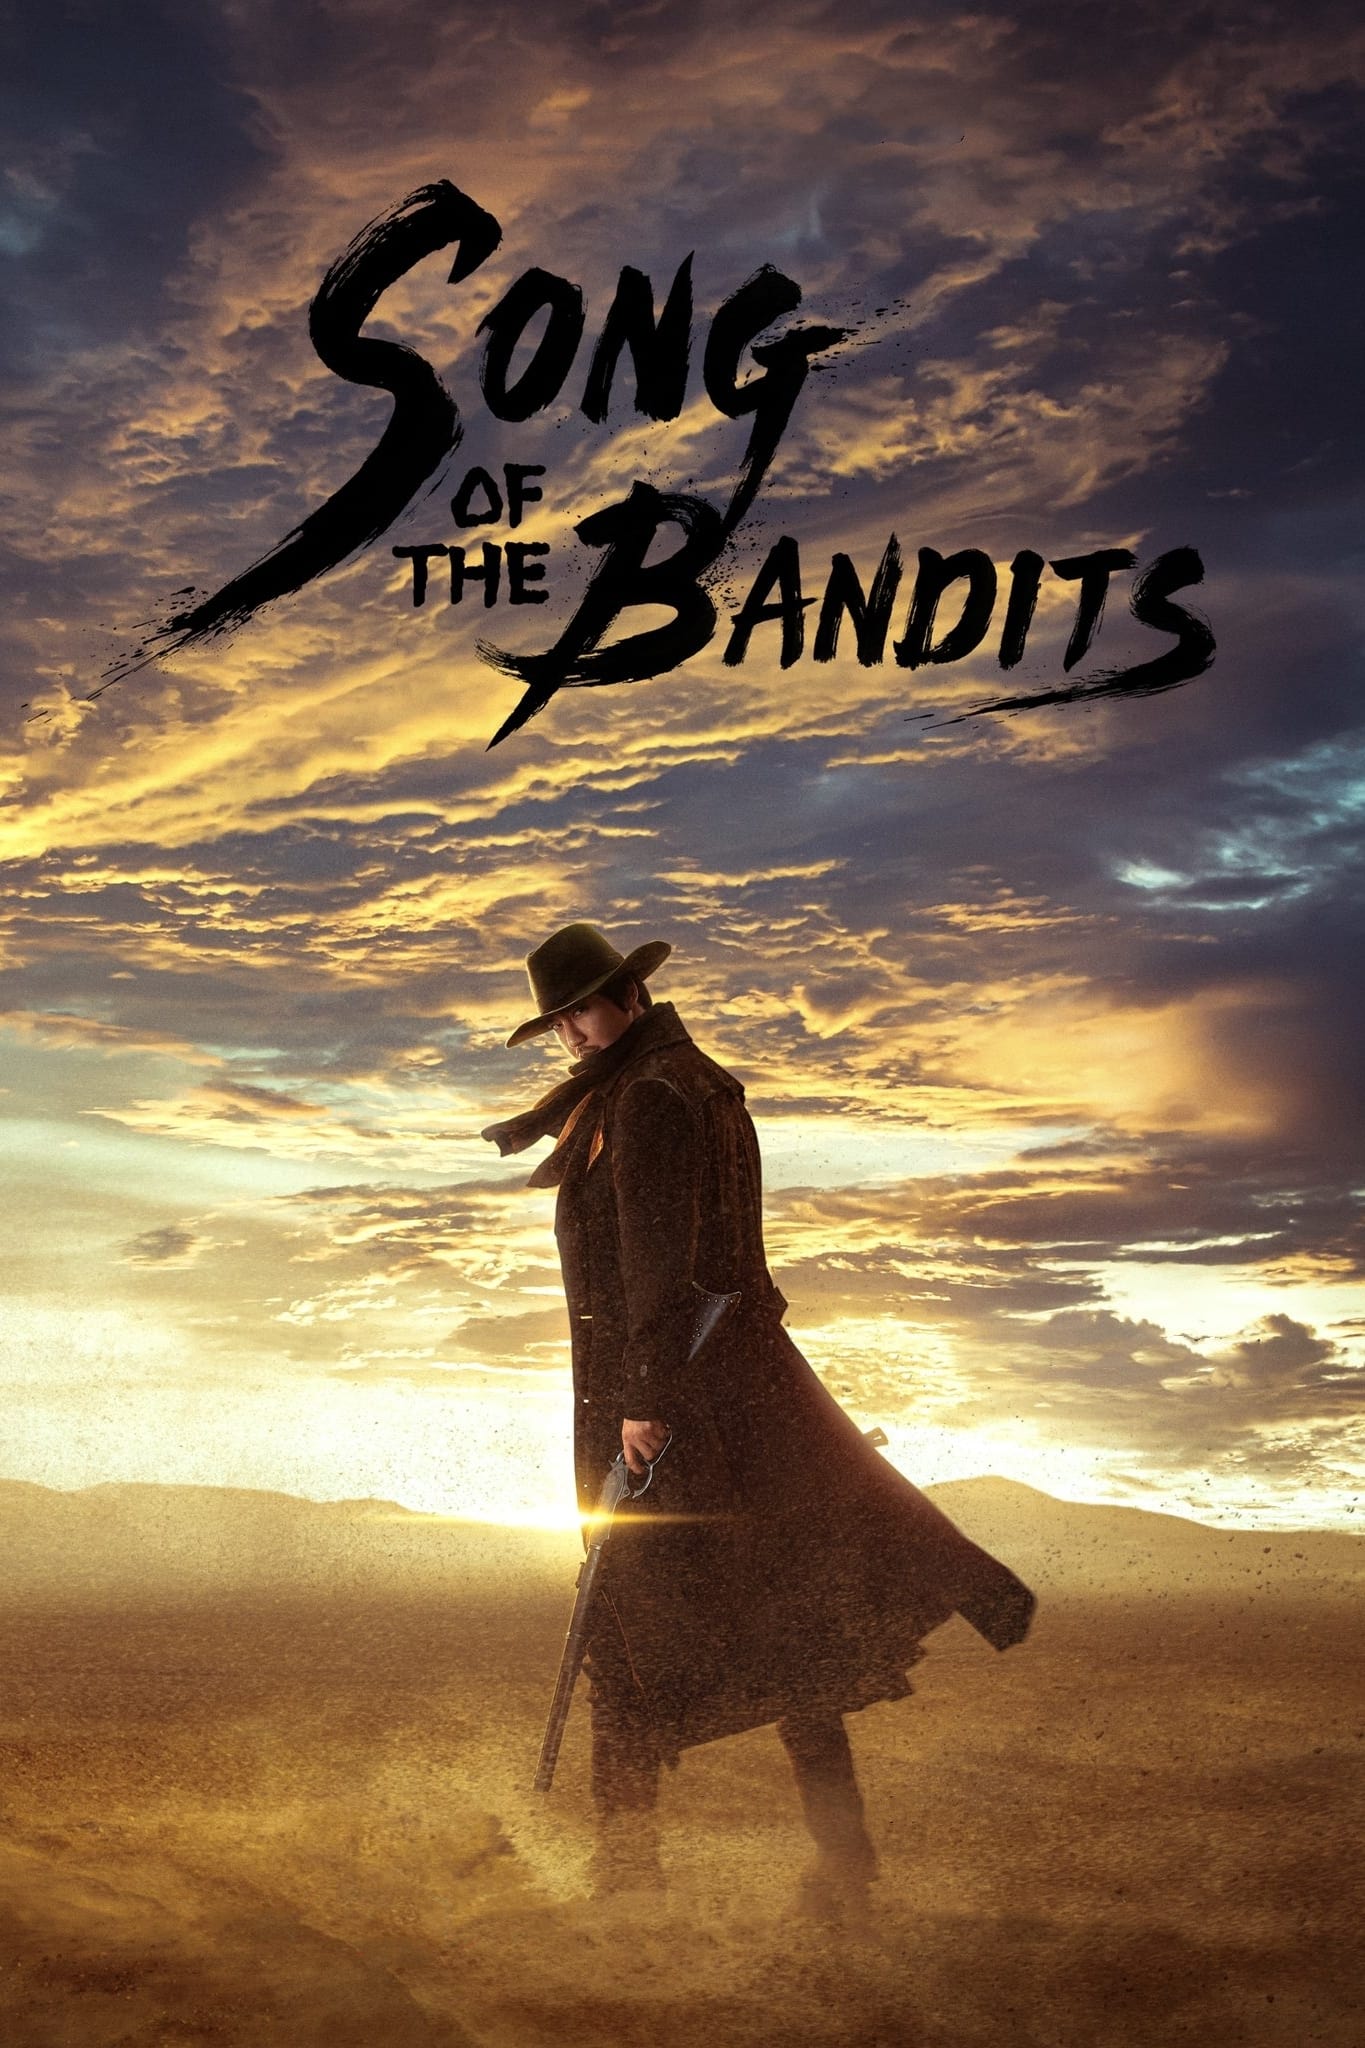 Voir Film Song of the Bandits - Série TV 2023 streaming VF gratuit complet